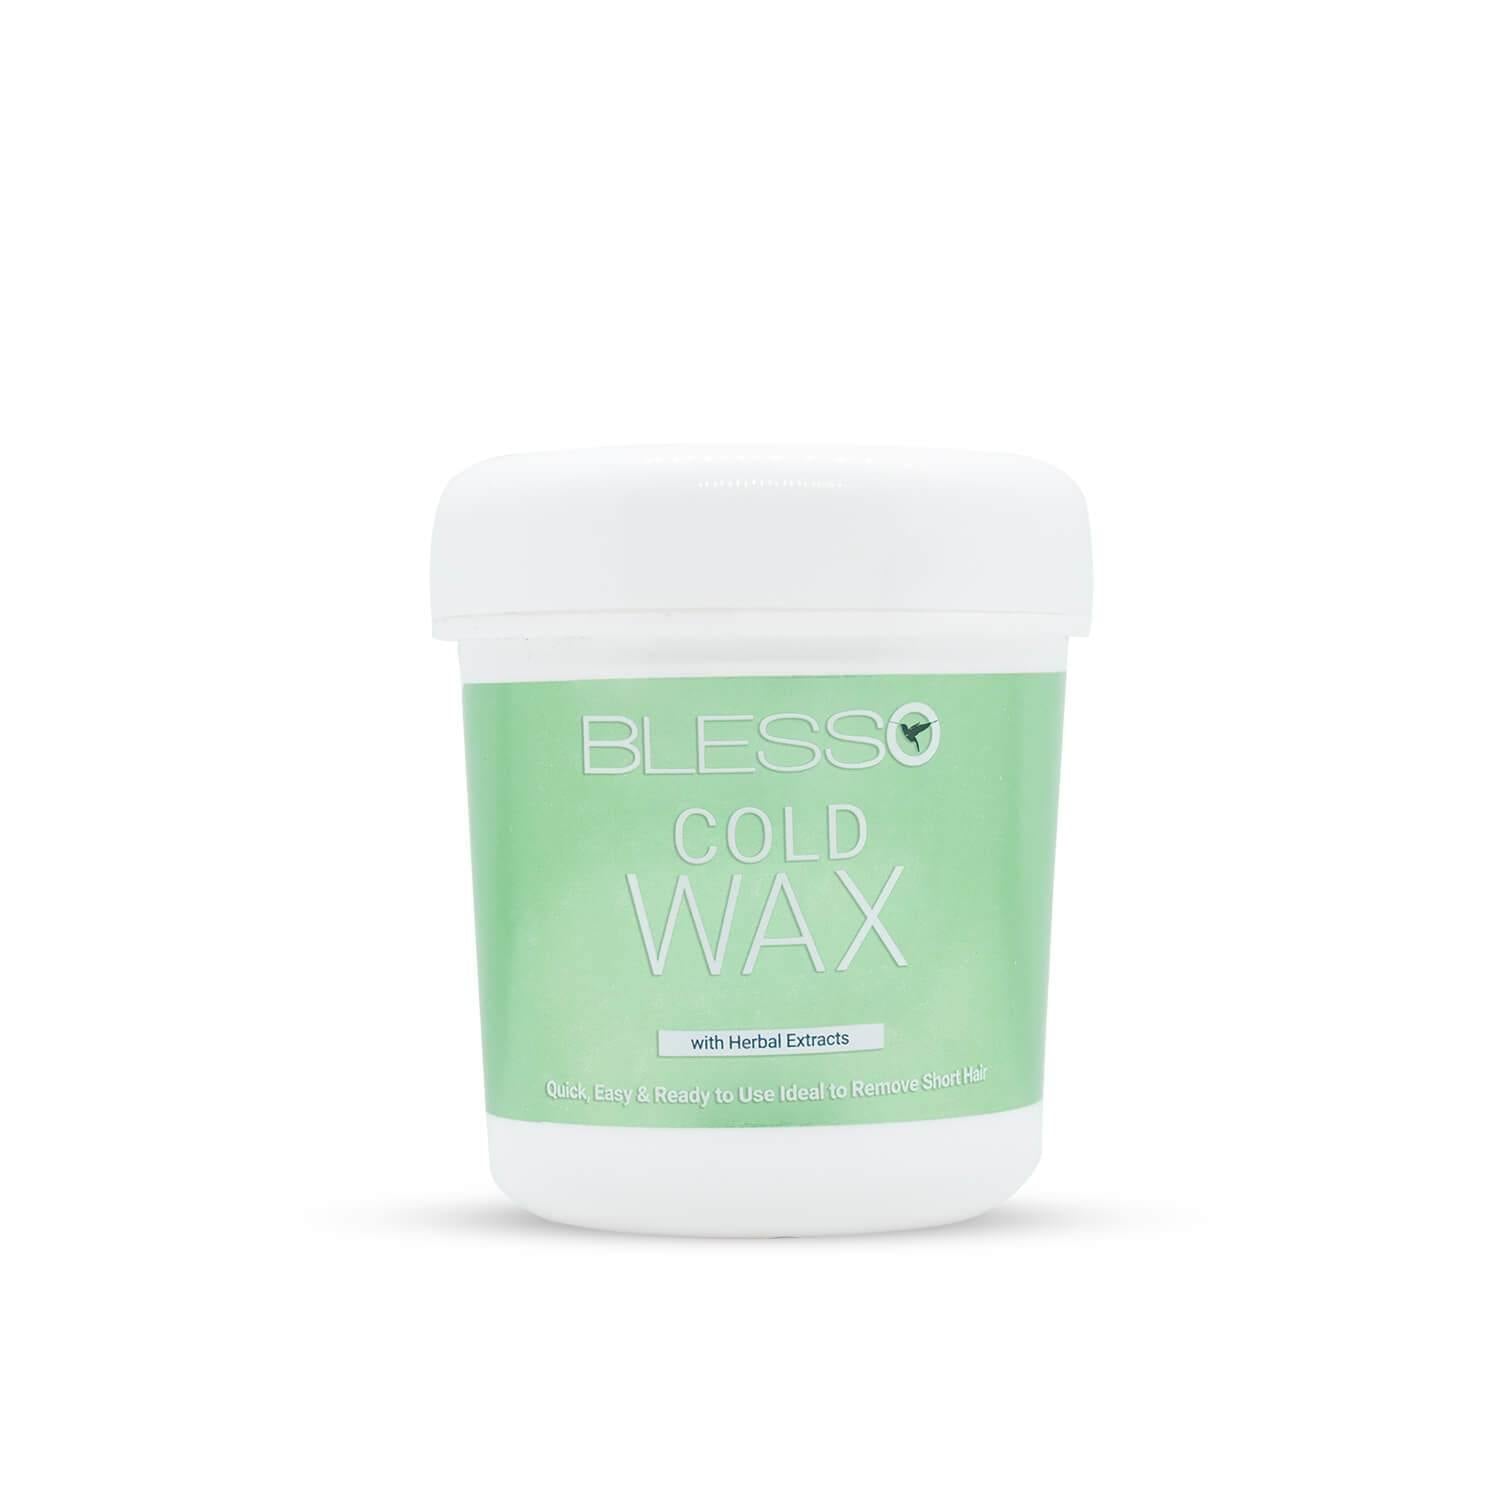 Blesso Cold Wax with Herbal Extracts - Blesso Cosmetics